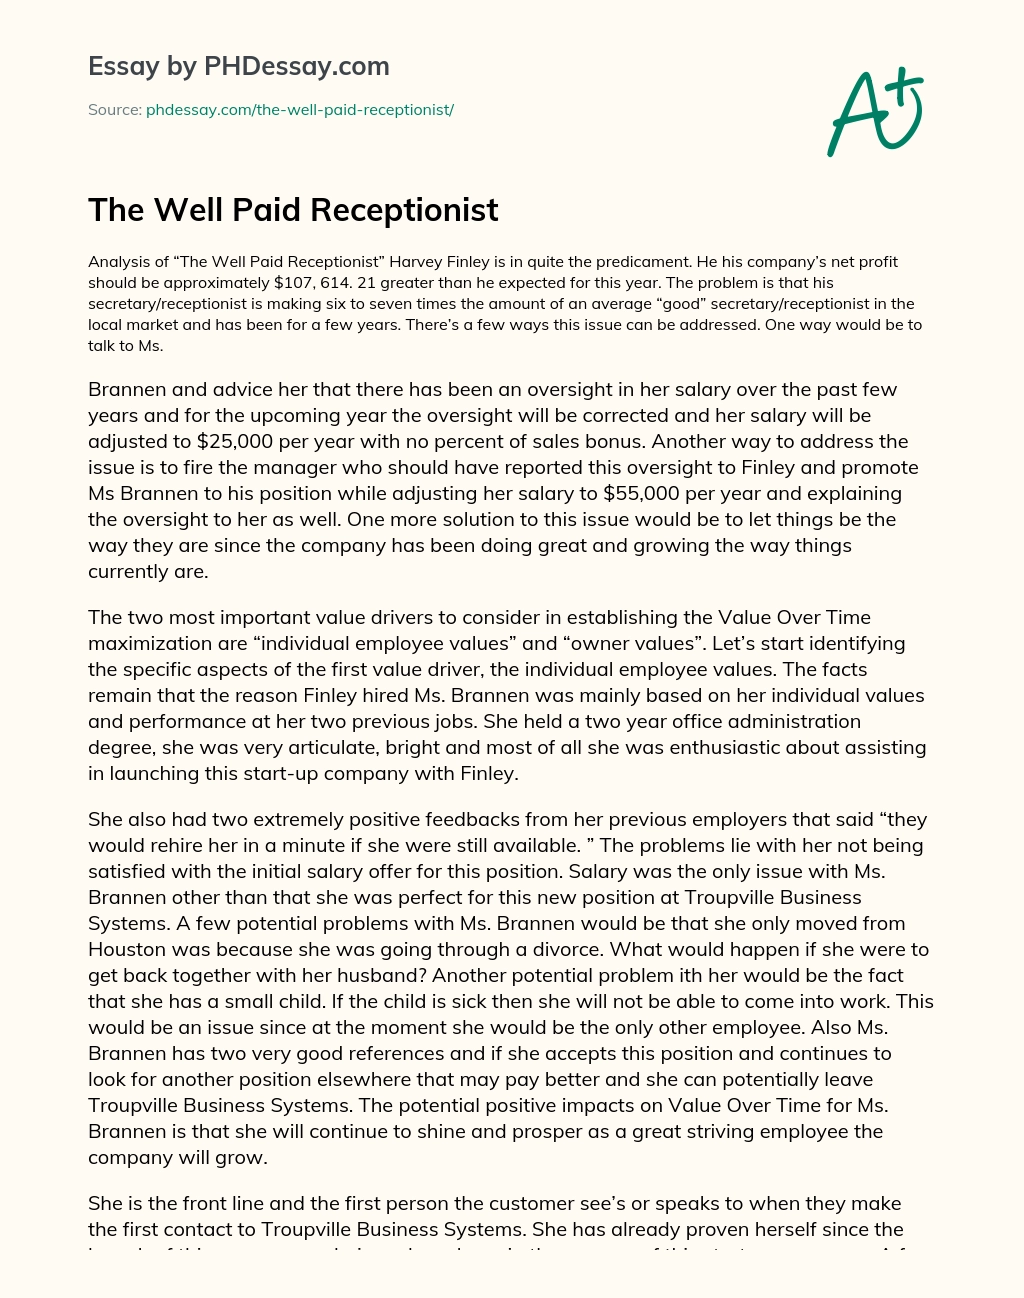 The Well Paid Receptionist essay